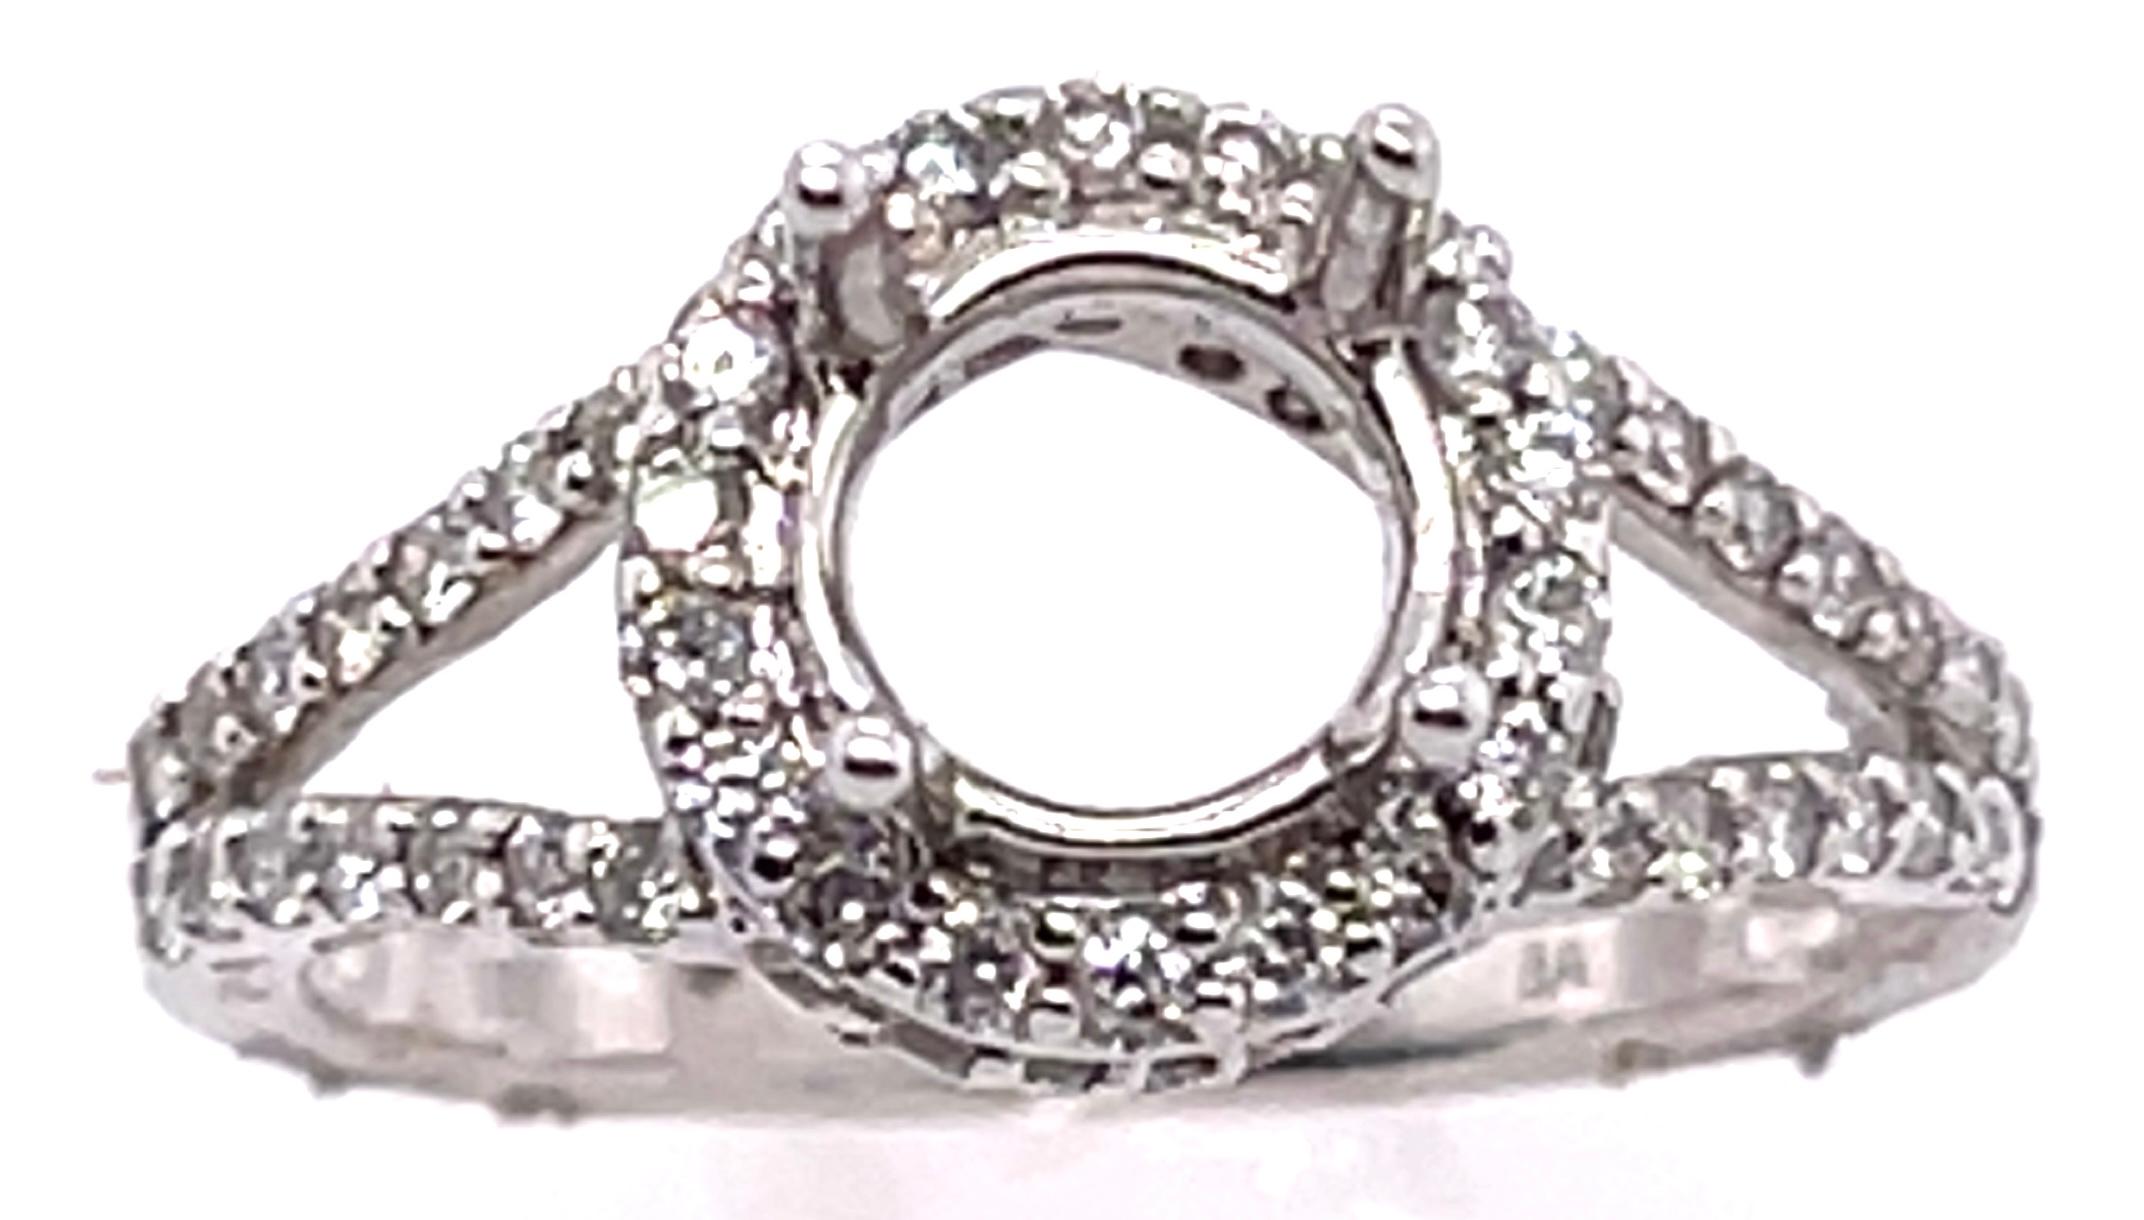 18 Karat White Gold Round Engagement Ring Setting Diamond Halo And Two Row Band
Size 6.5
0.80 total diamond weight.
4.42 grams total weight.